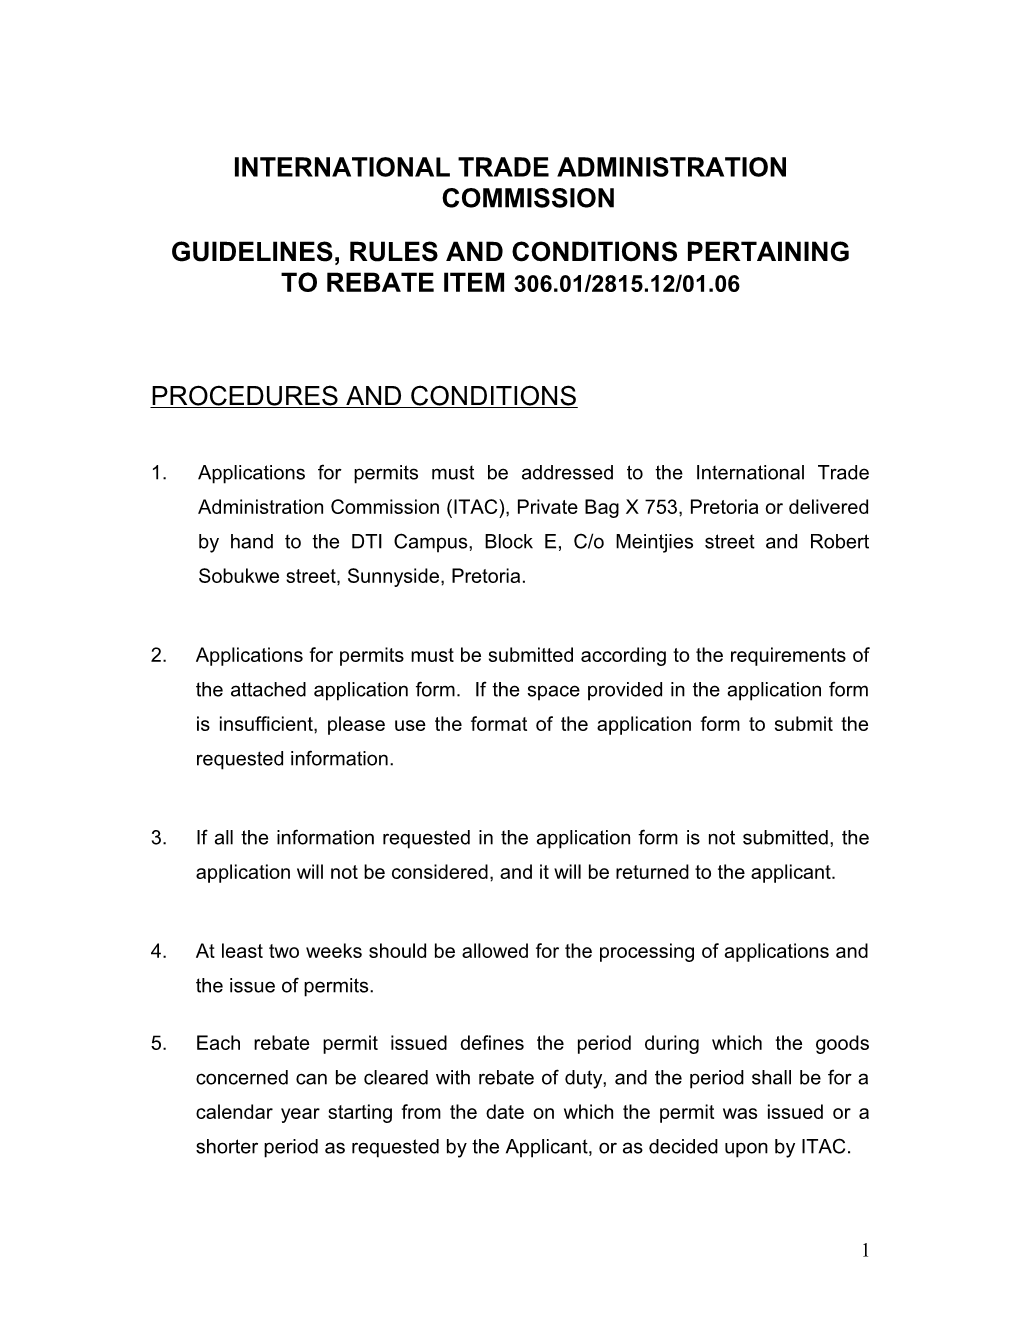 International Trade Administration Commission s1